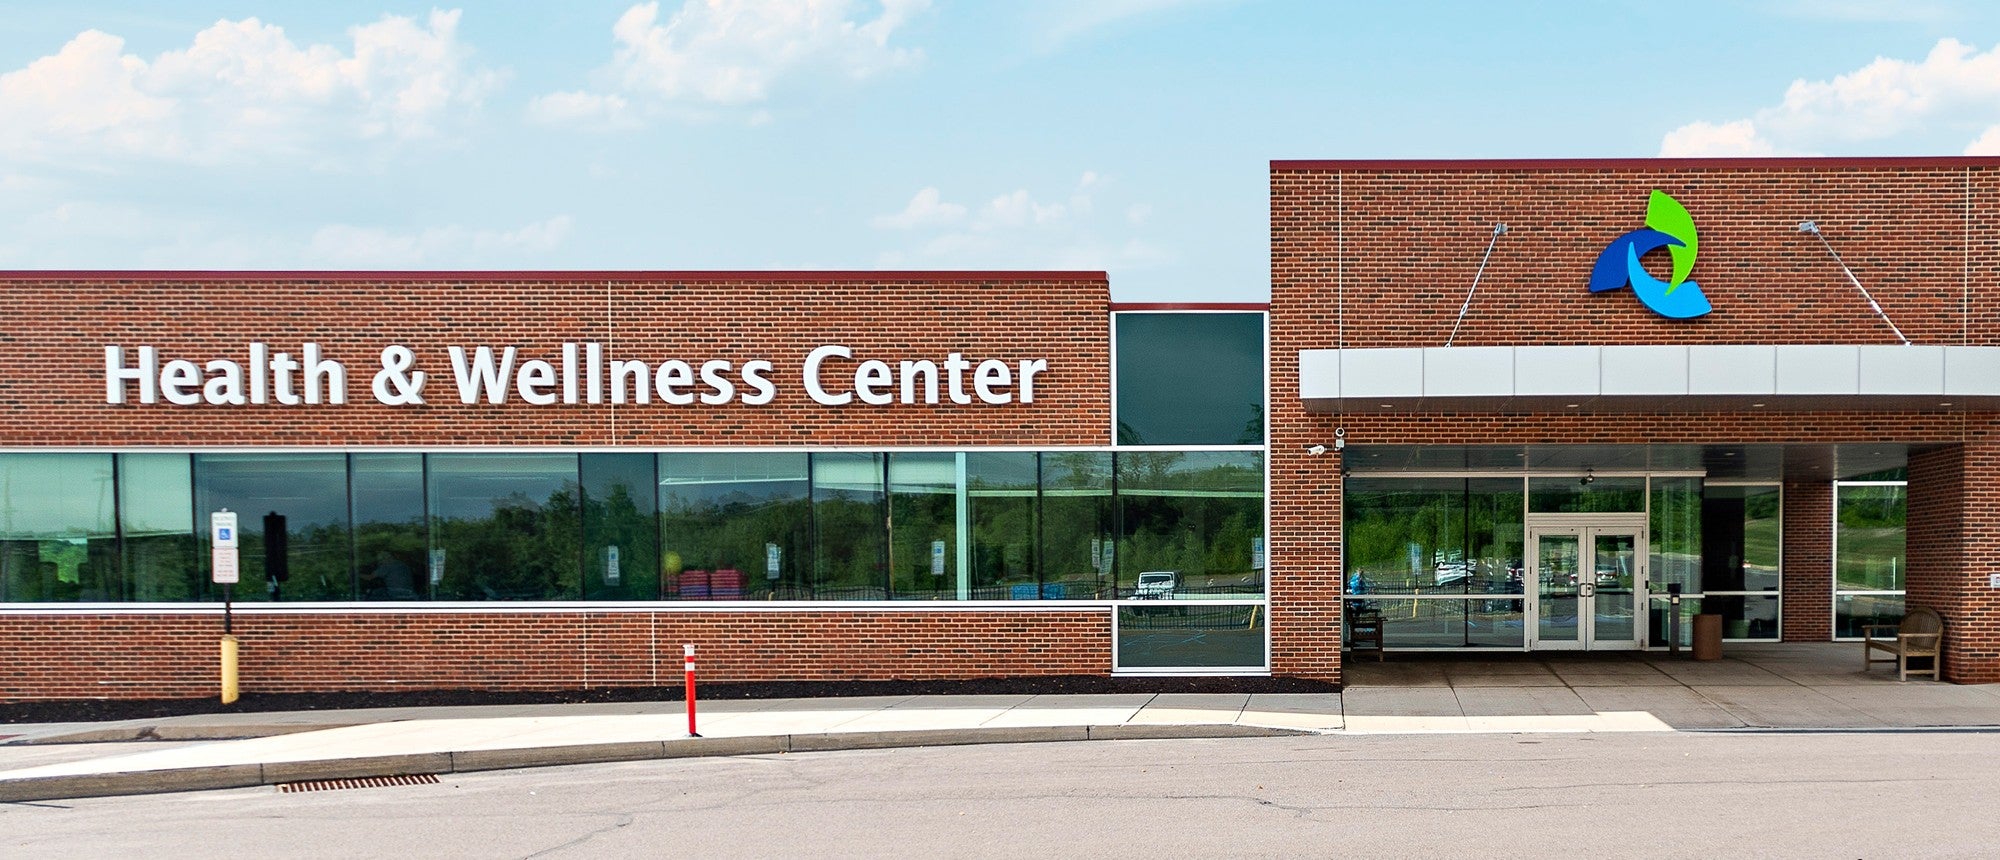 LVPG Weight Loss Management Center at the Health & Wellness Center at Hazleton